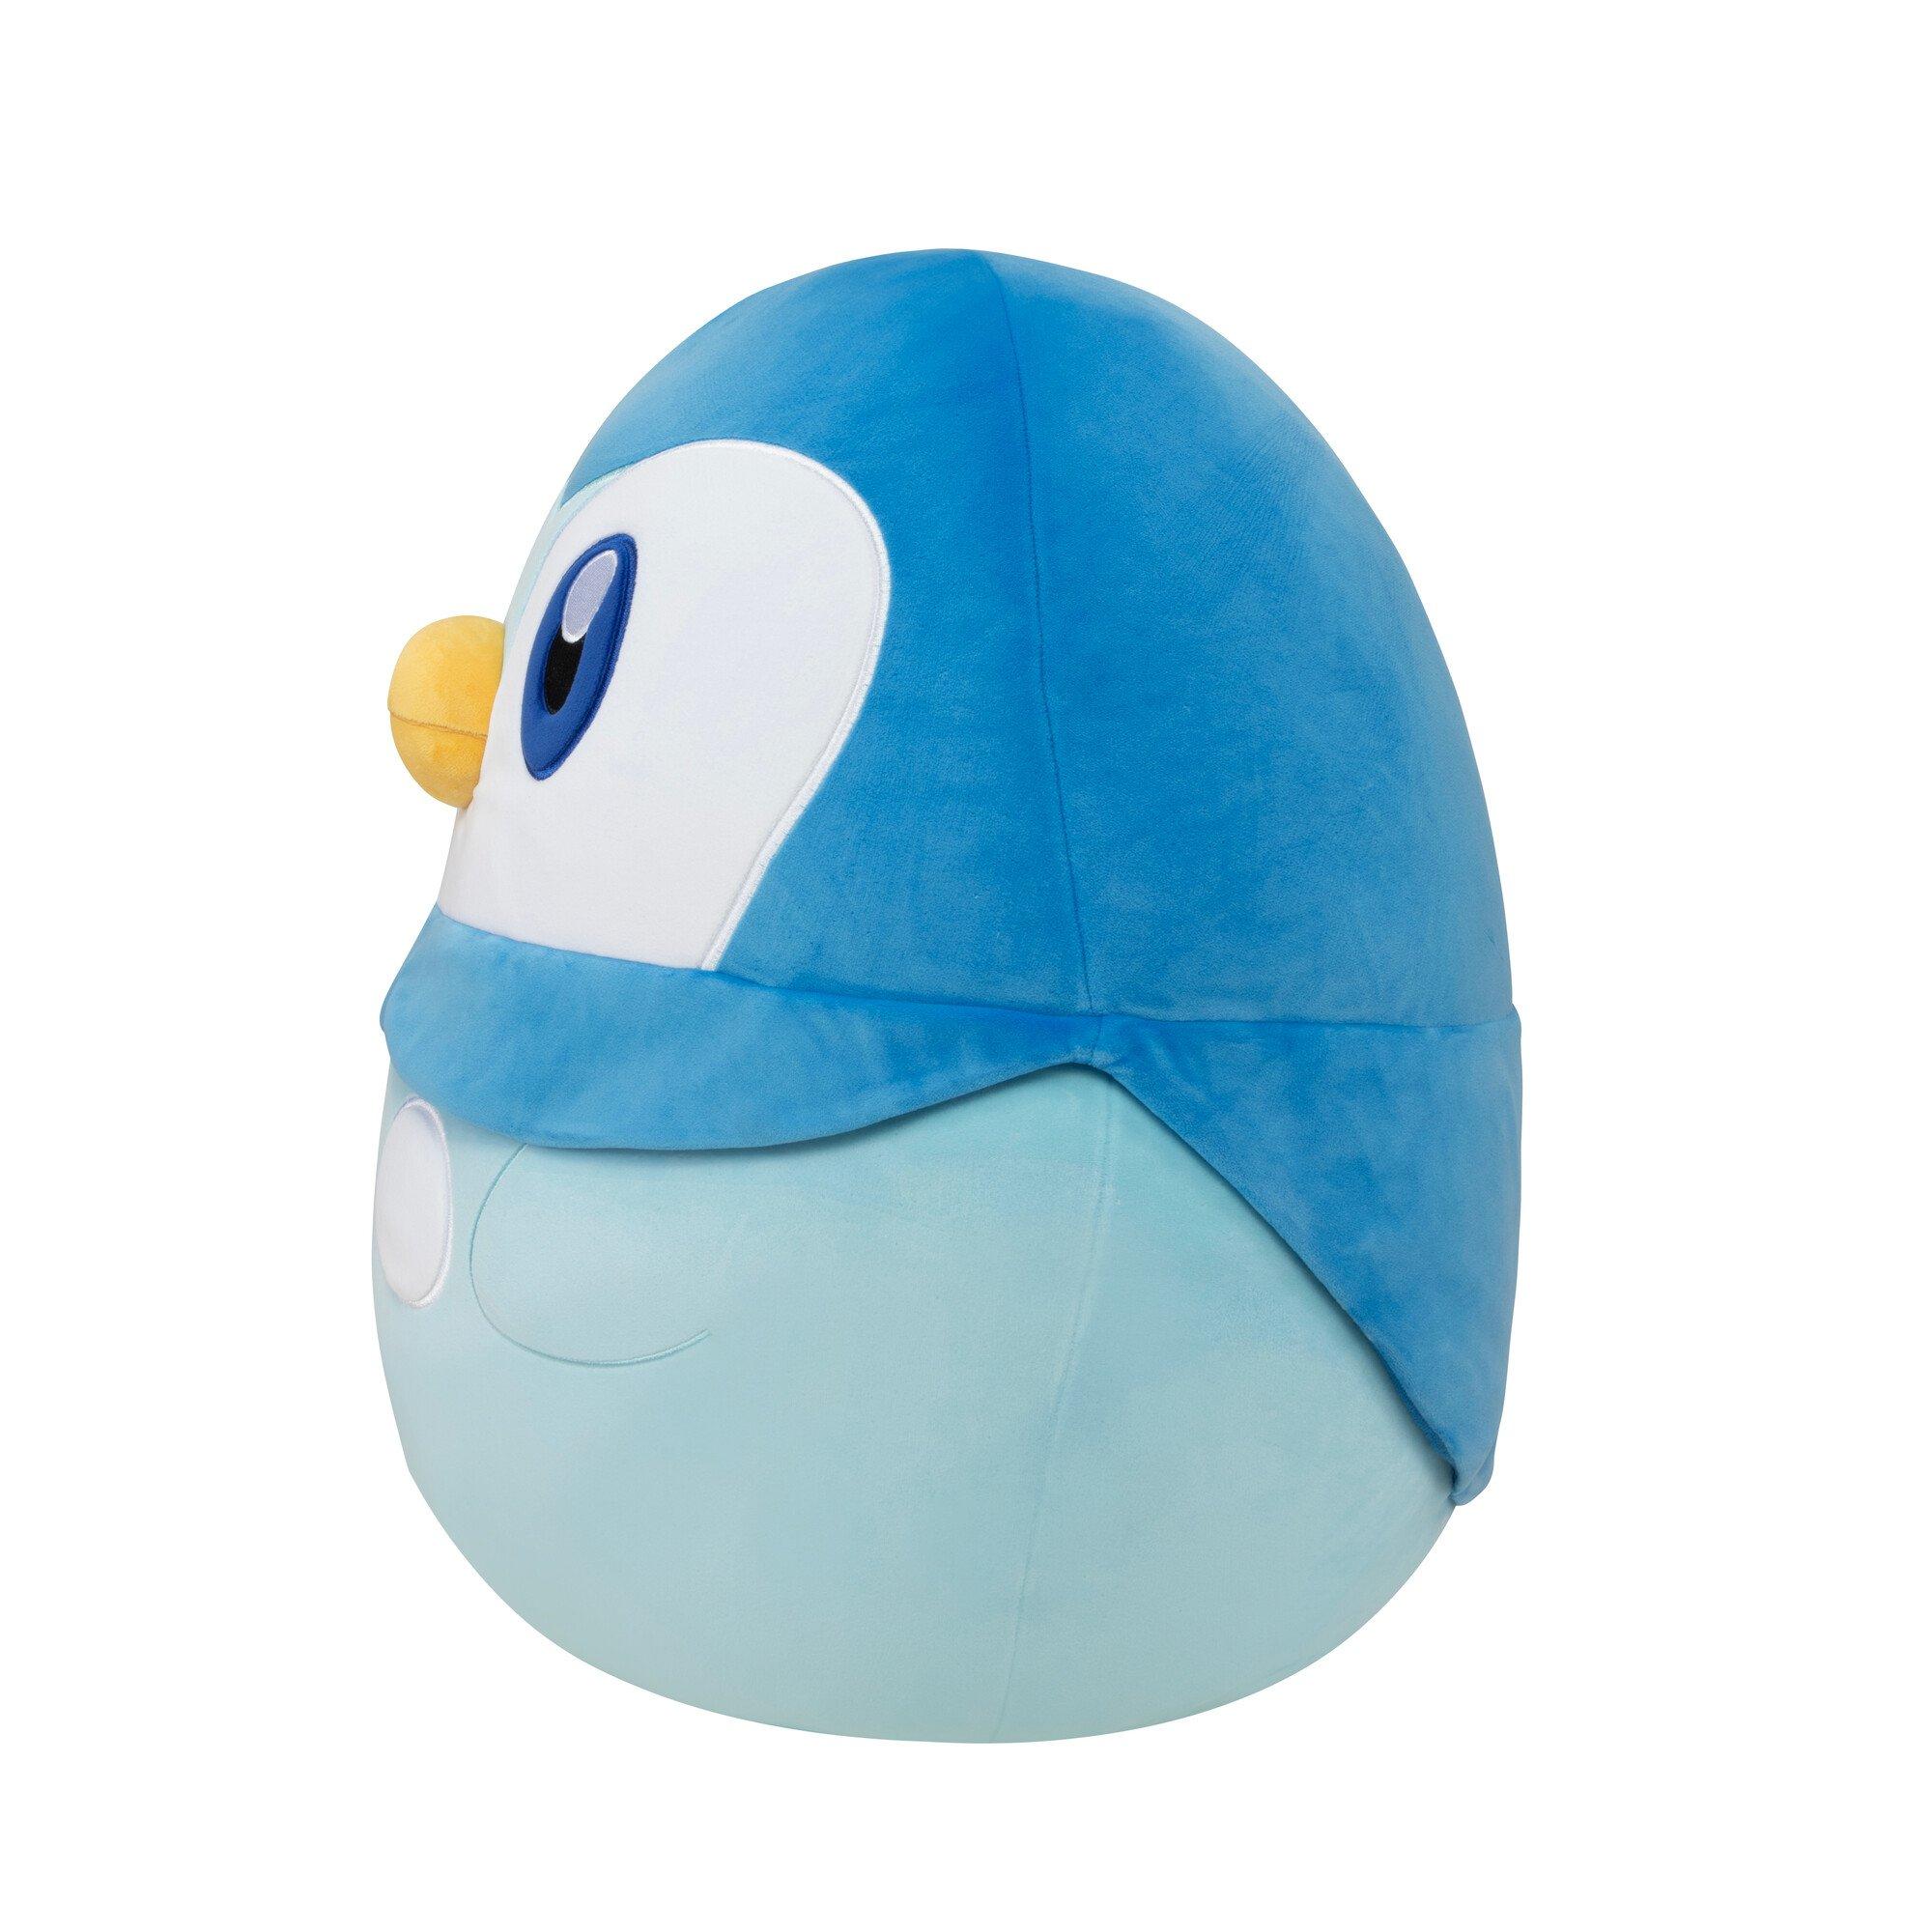 Squishmallows Pokemon 20-Inch Piplup Plush - Add Piplup to Your Squad,  Ultrasoft Stuffed Animal Medium Plush, Official Kelly Toy Plush